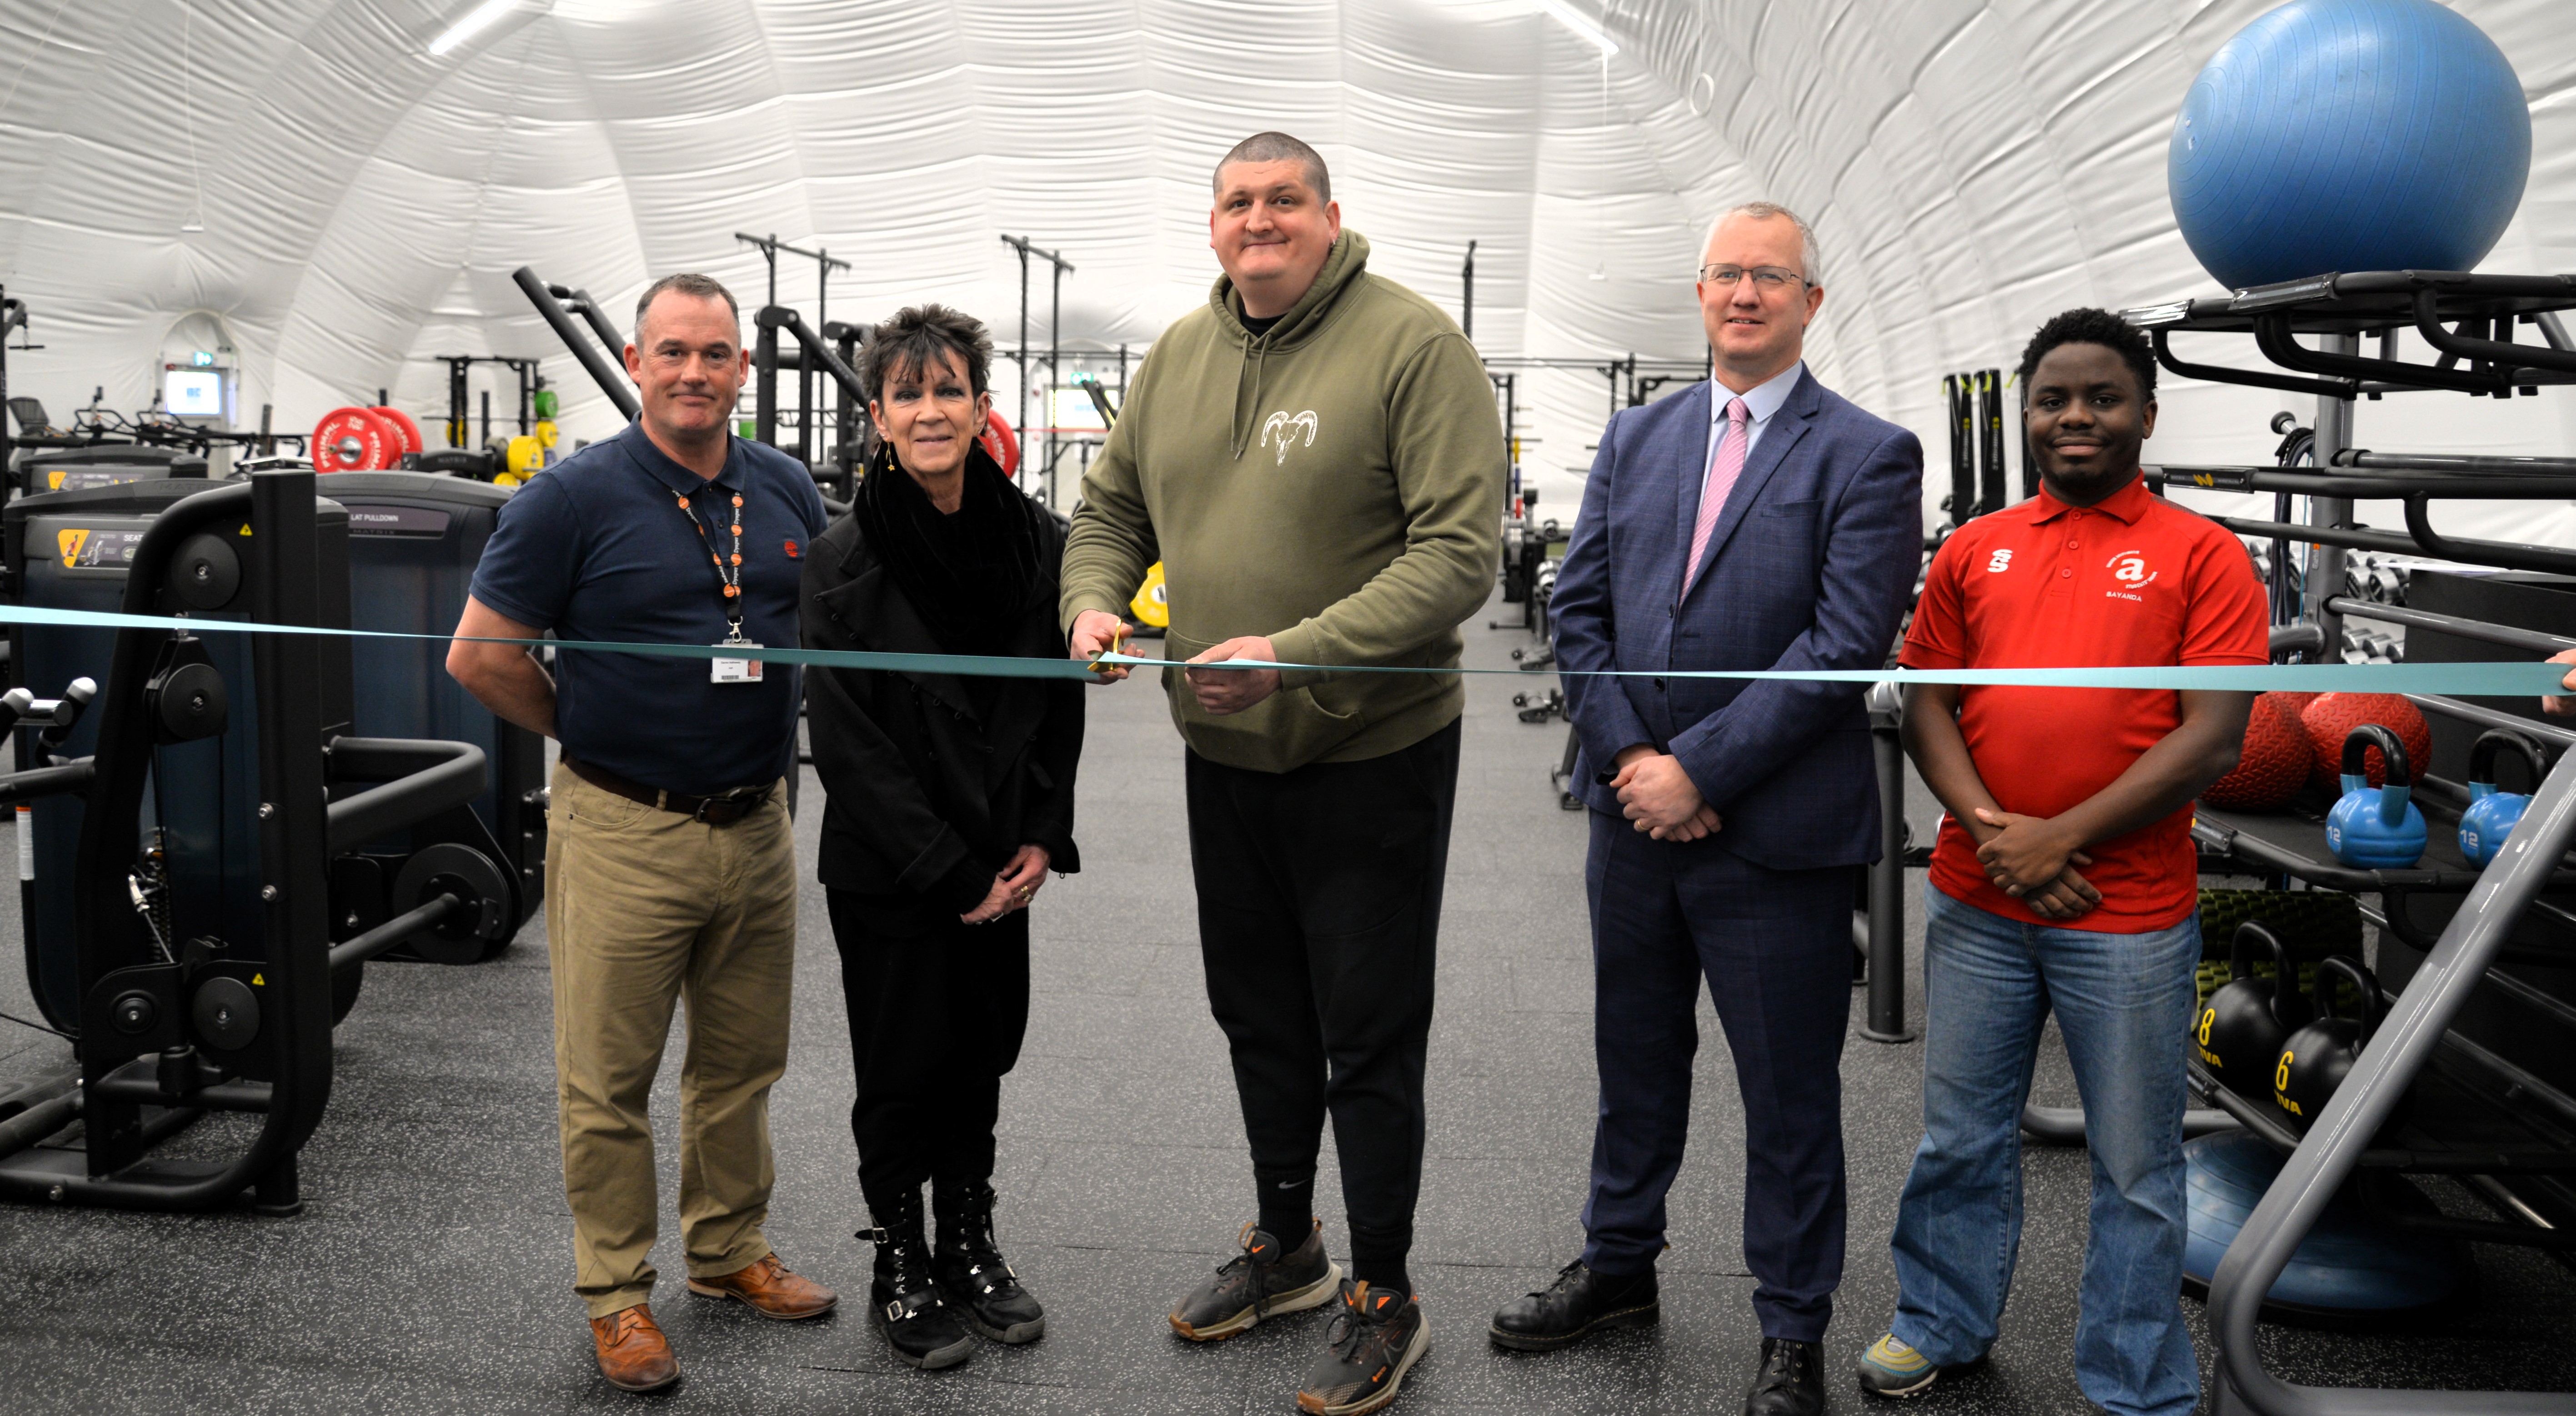 Left to right: Darren Hathaway, Head of Sport and Grounds; Meri Huws, Chair of University Council; Gareth Ward, Ynyshir; Professor Jon Timmis, Vice-Chancellor and Bayanda Vundamina, President of Aberystwyth Students’ Union at the opening of the new University sports dome and gym.